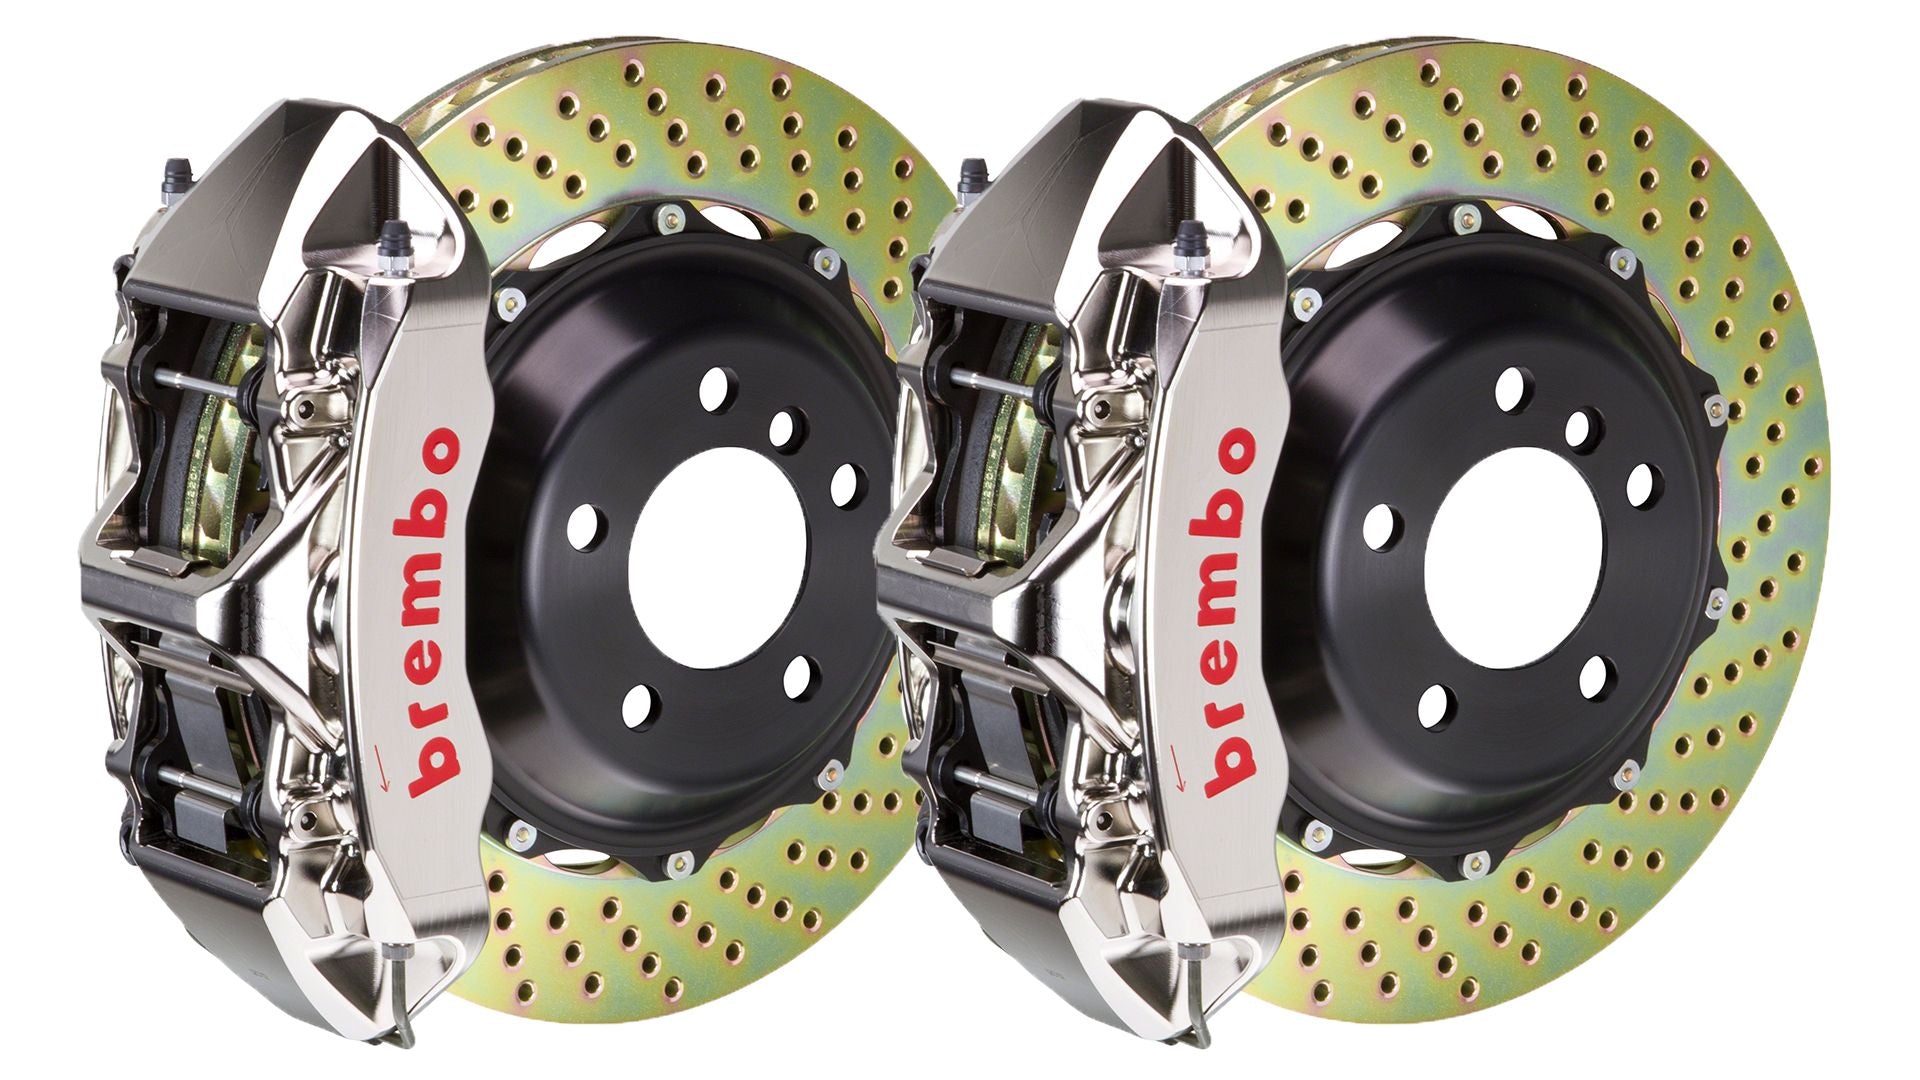 Brembo Front GT Brake 6pot GT-R 380x32 Drill GS350 GS450h 12+ IS350 14+ RC350